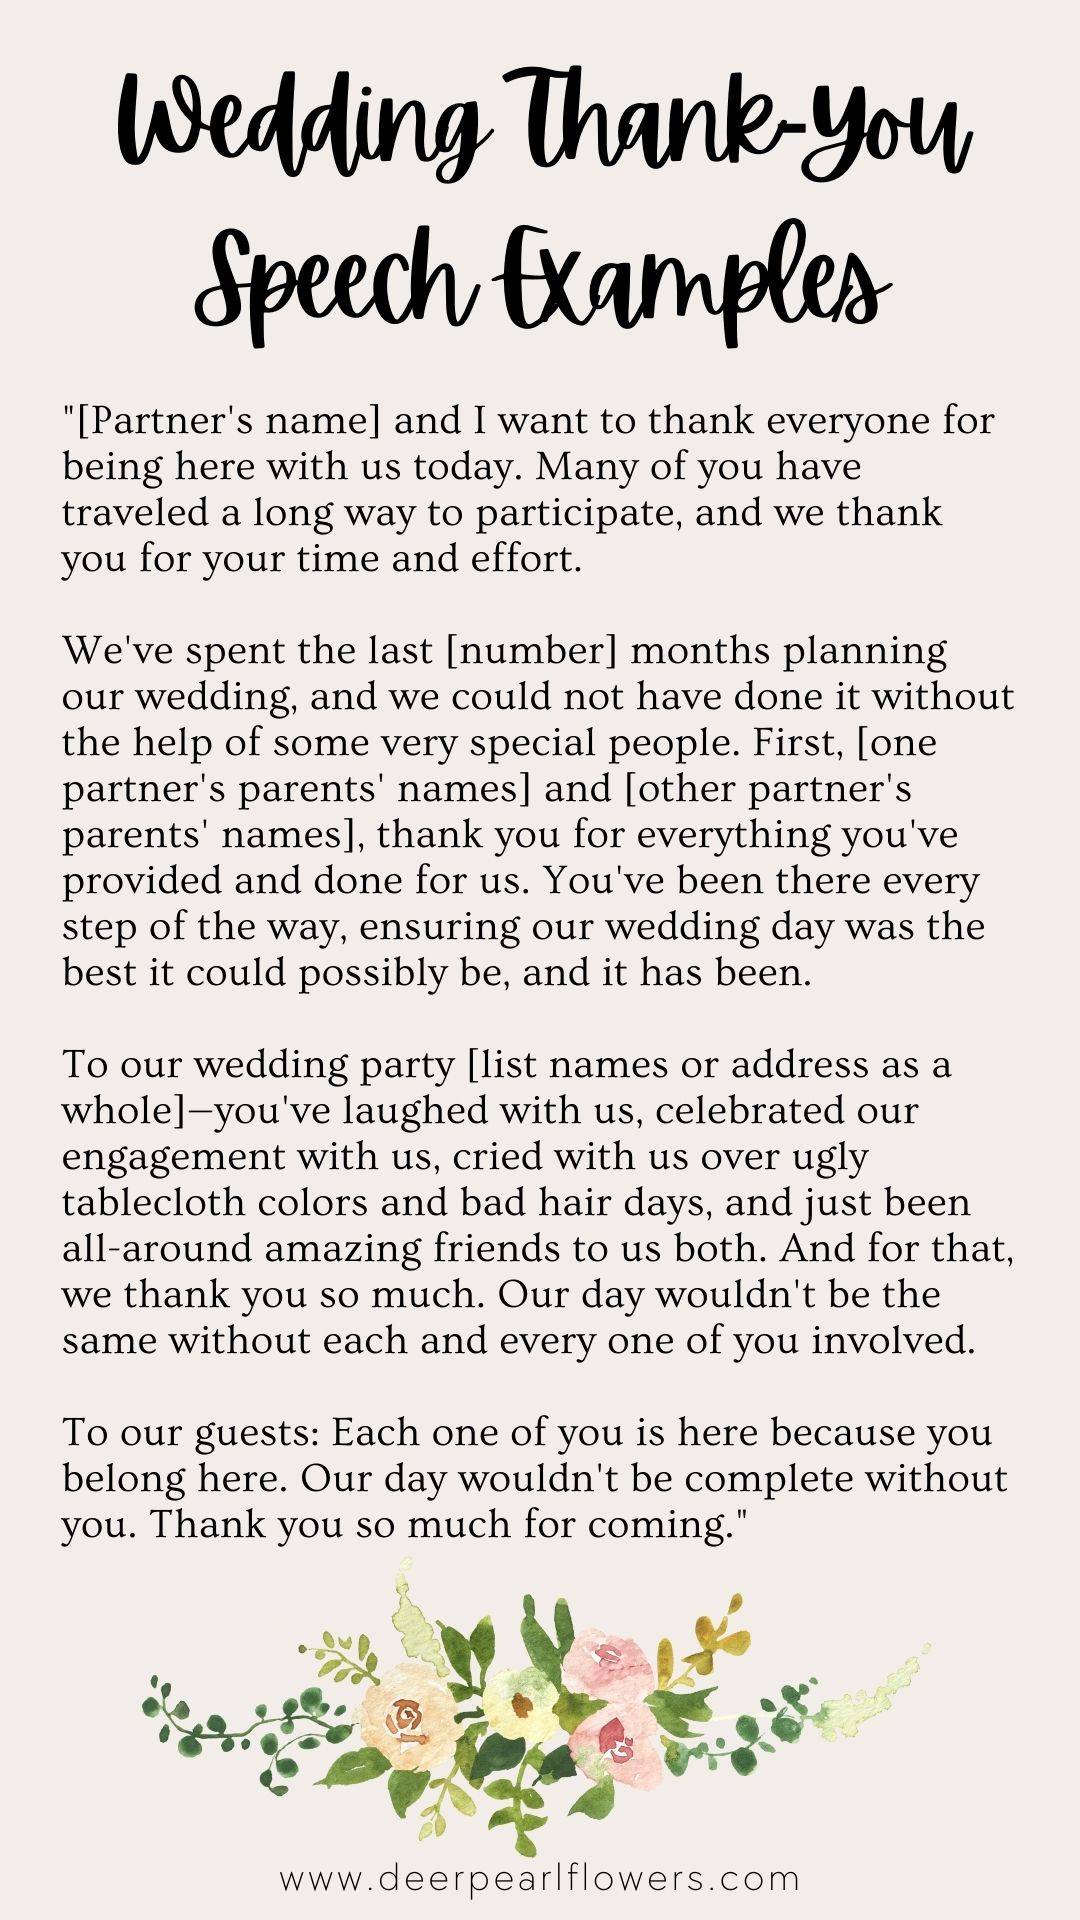 Wedding Thank You Speech Dos And Donts Guide With Examples